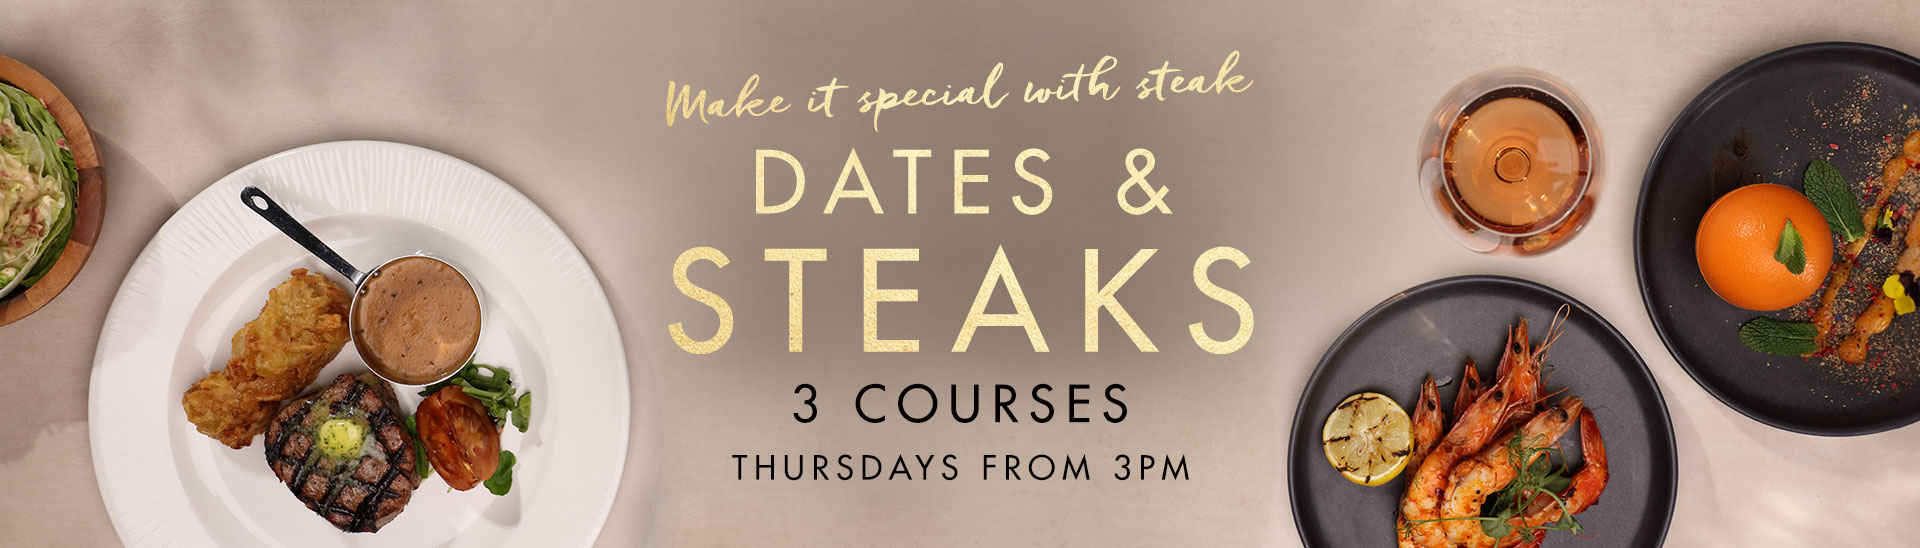 Dates & Steaks at Miller & Carter Plymouth